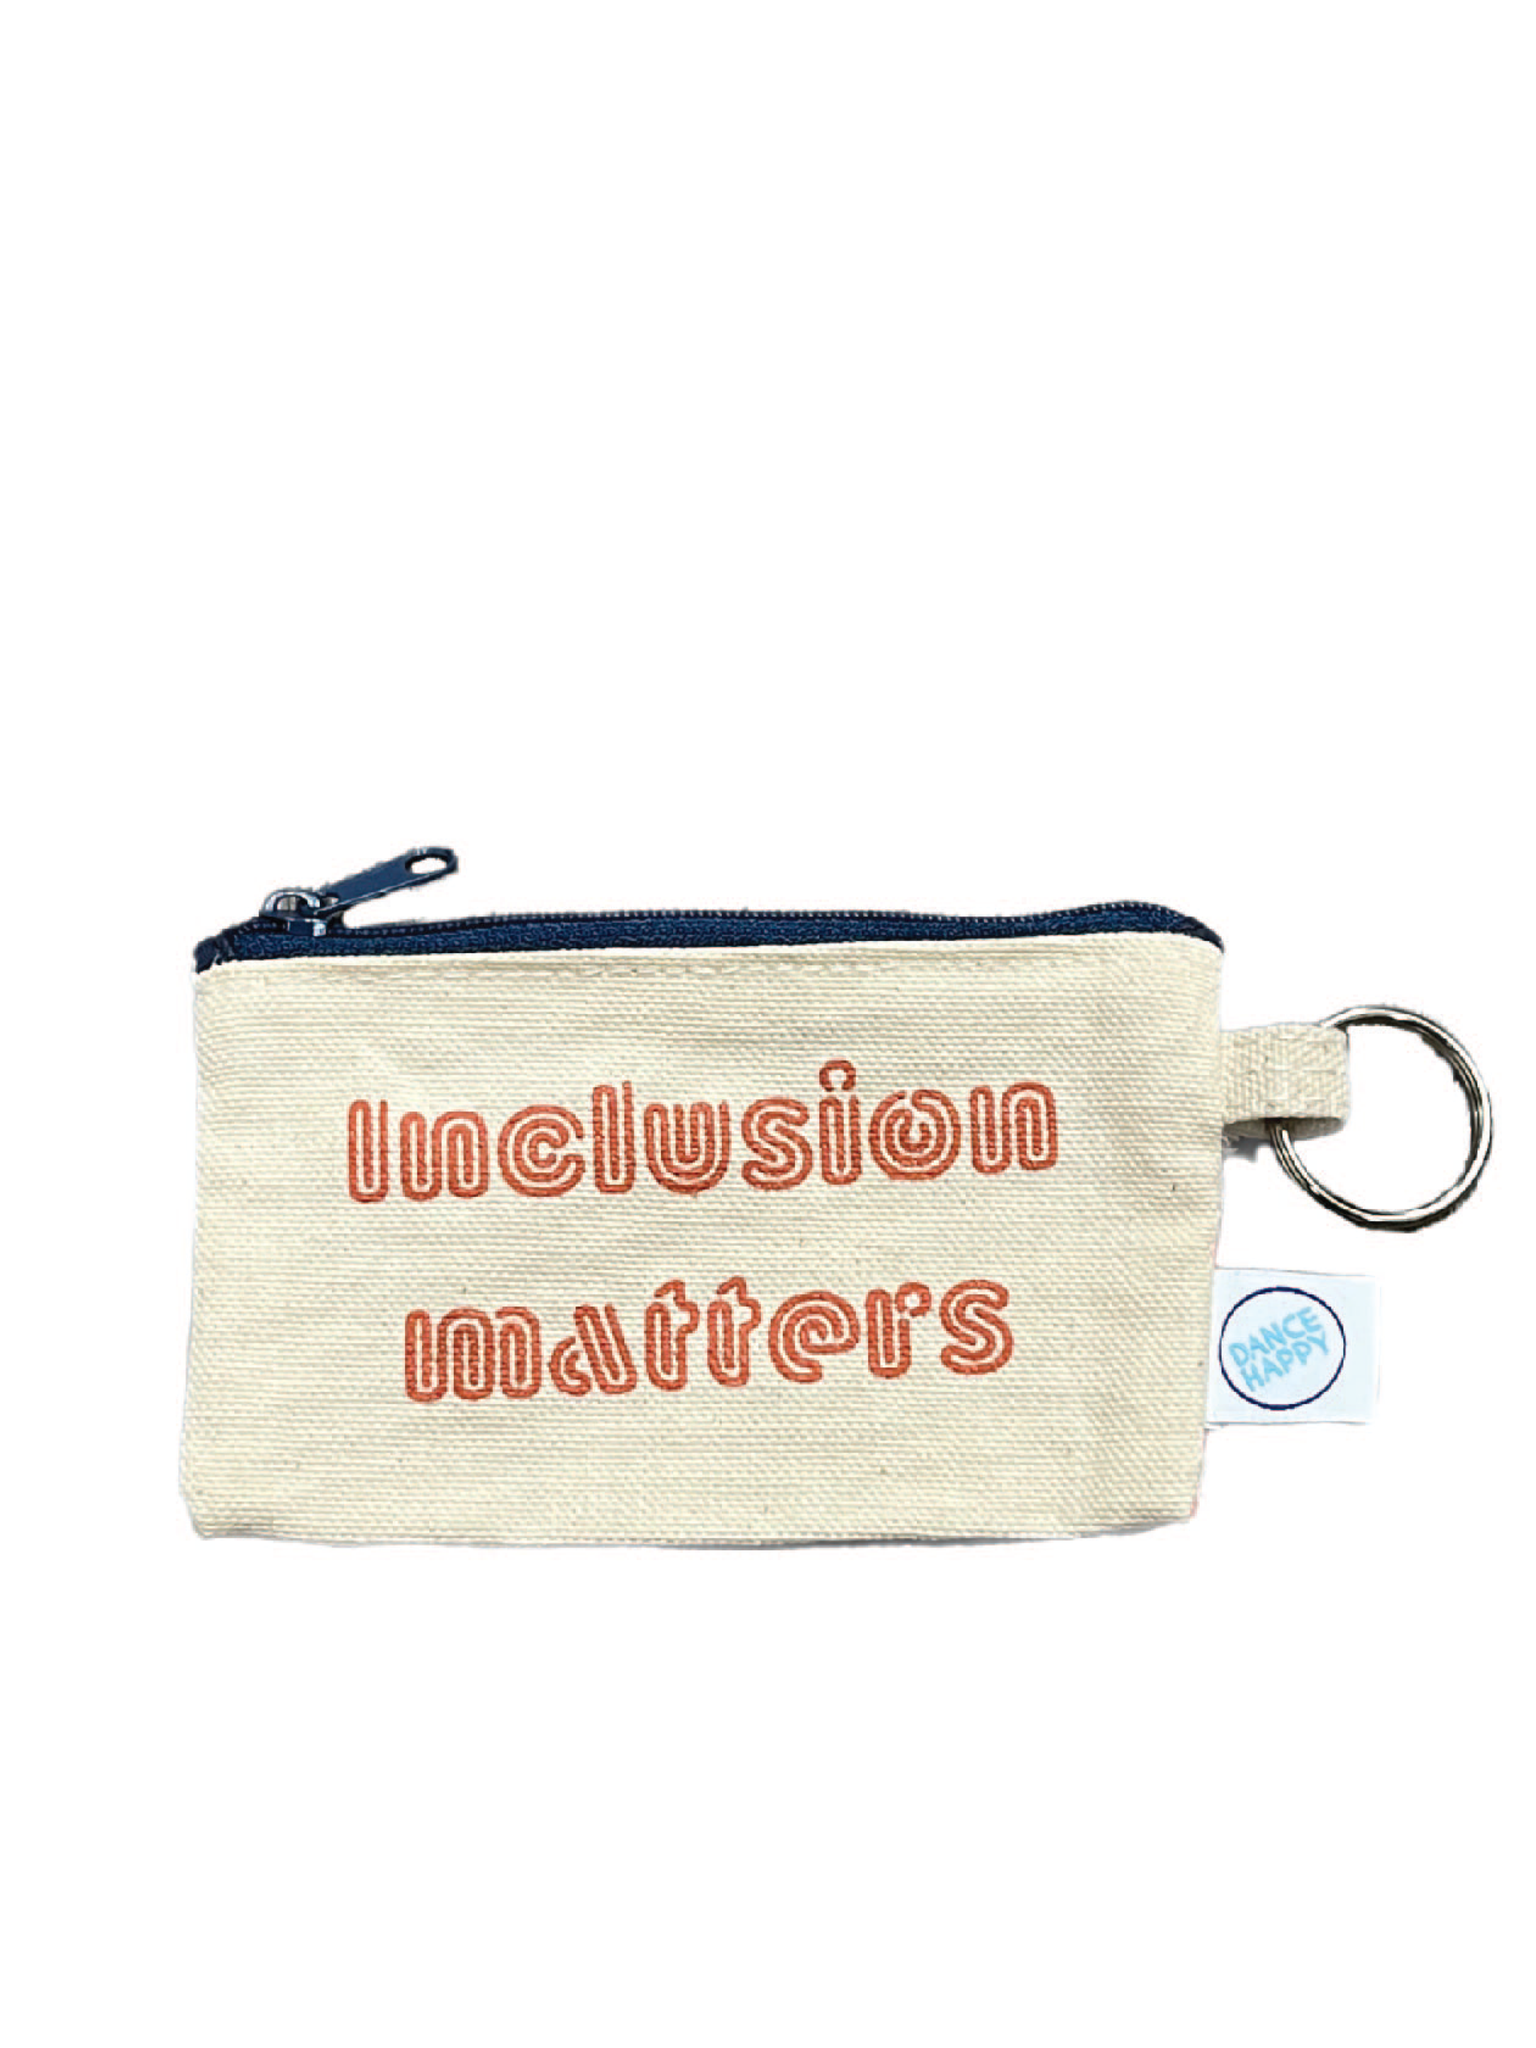 Inclusion Matters cardholder with keyring